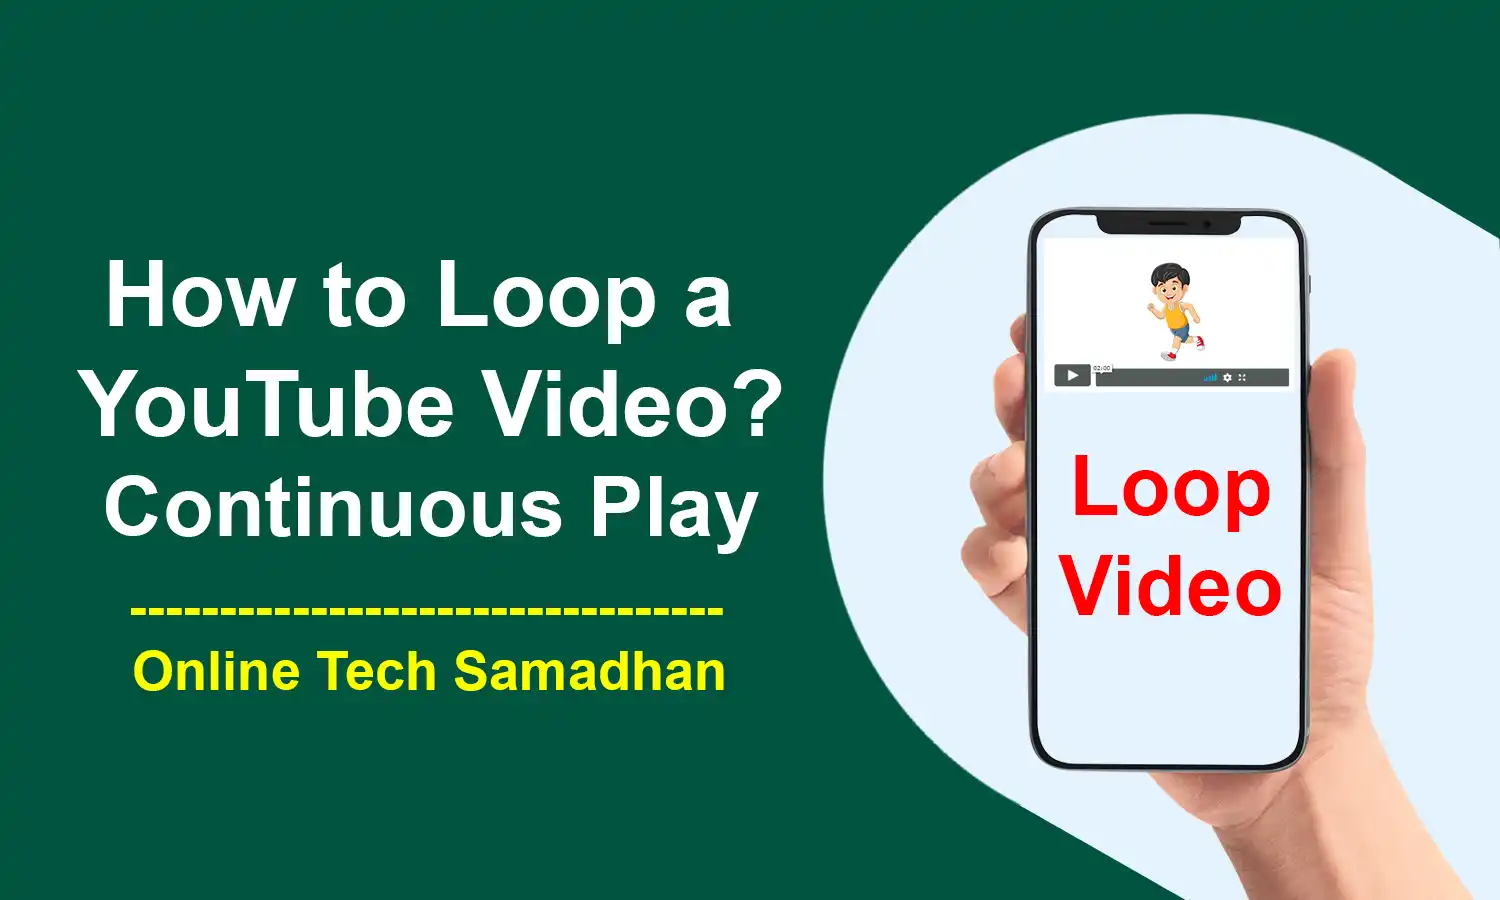 How to Loop a YouTube Video